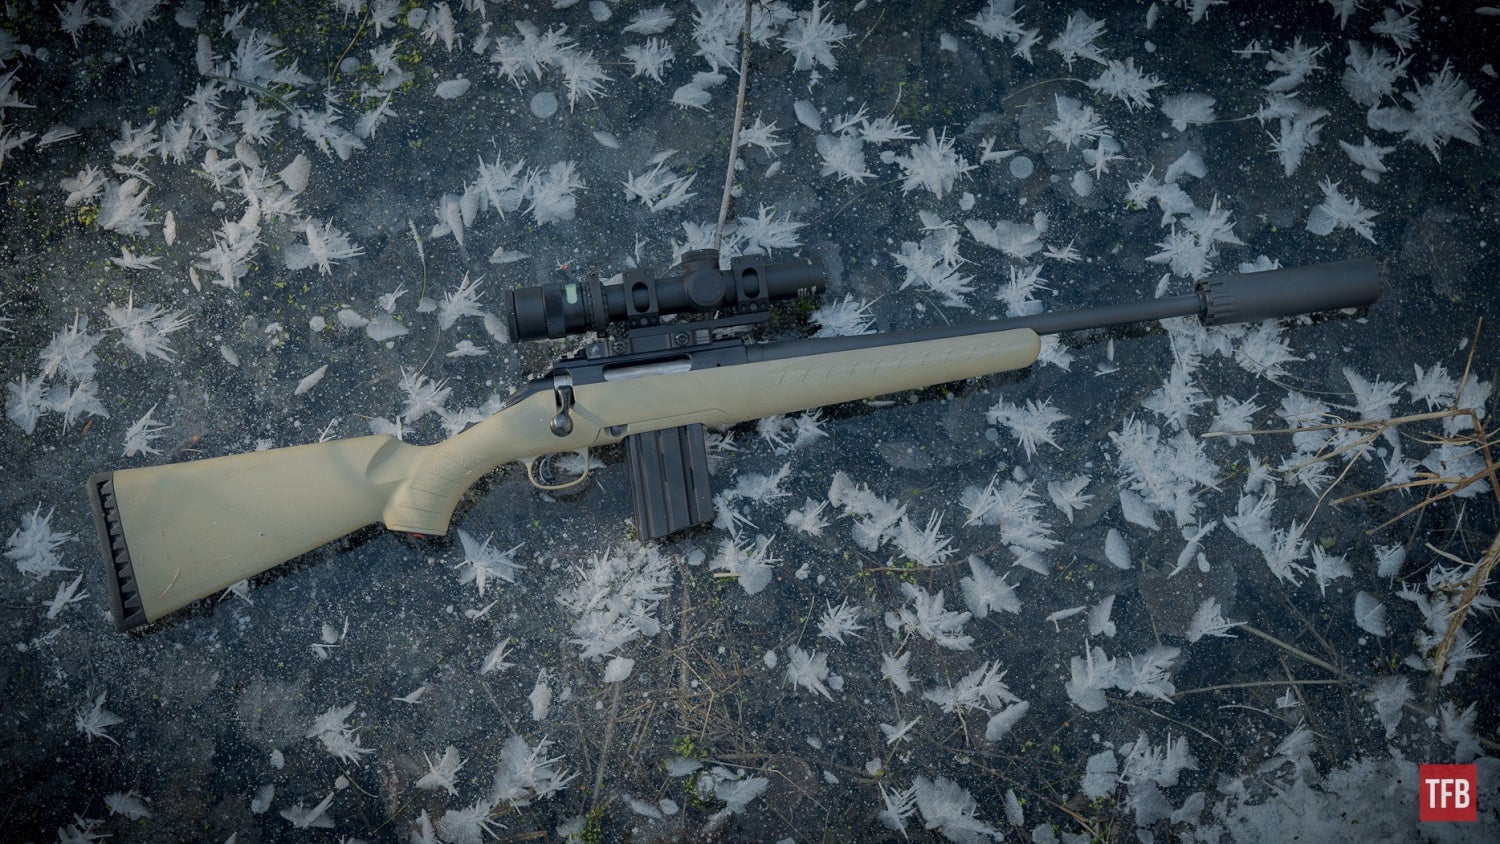 SILENCER SATURDAY #265: Why Everyone Needs 5.56 Bolt Action Rifle